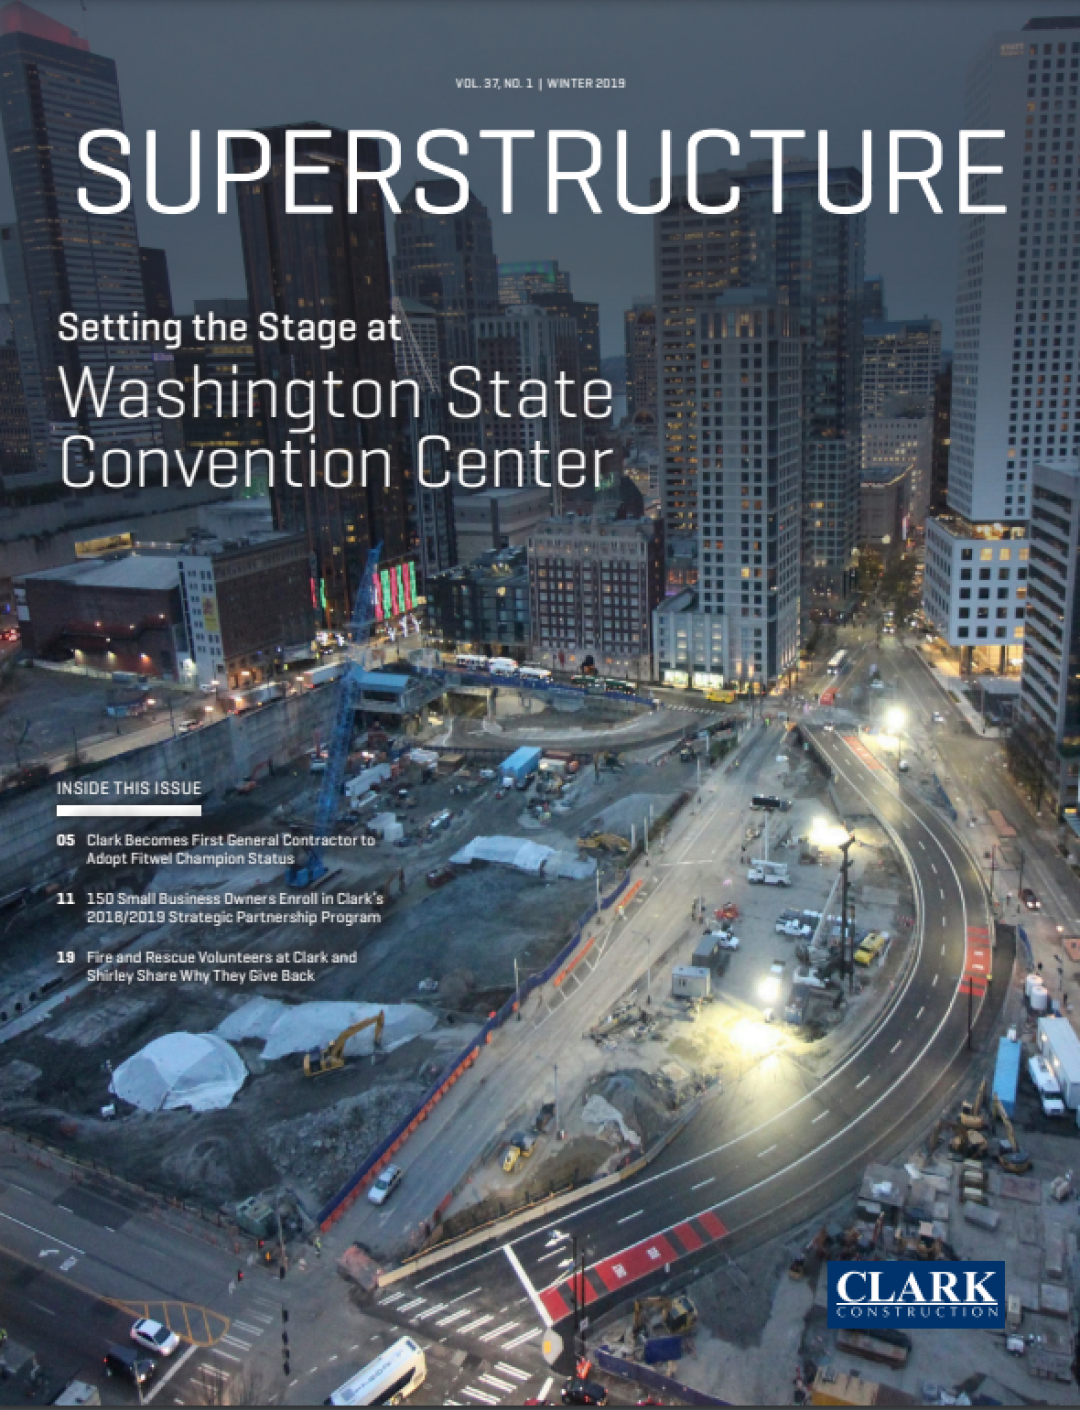 Superstructure Winter 2019